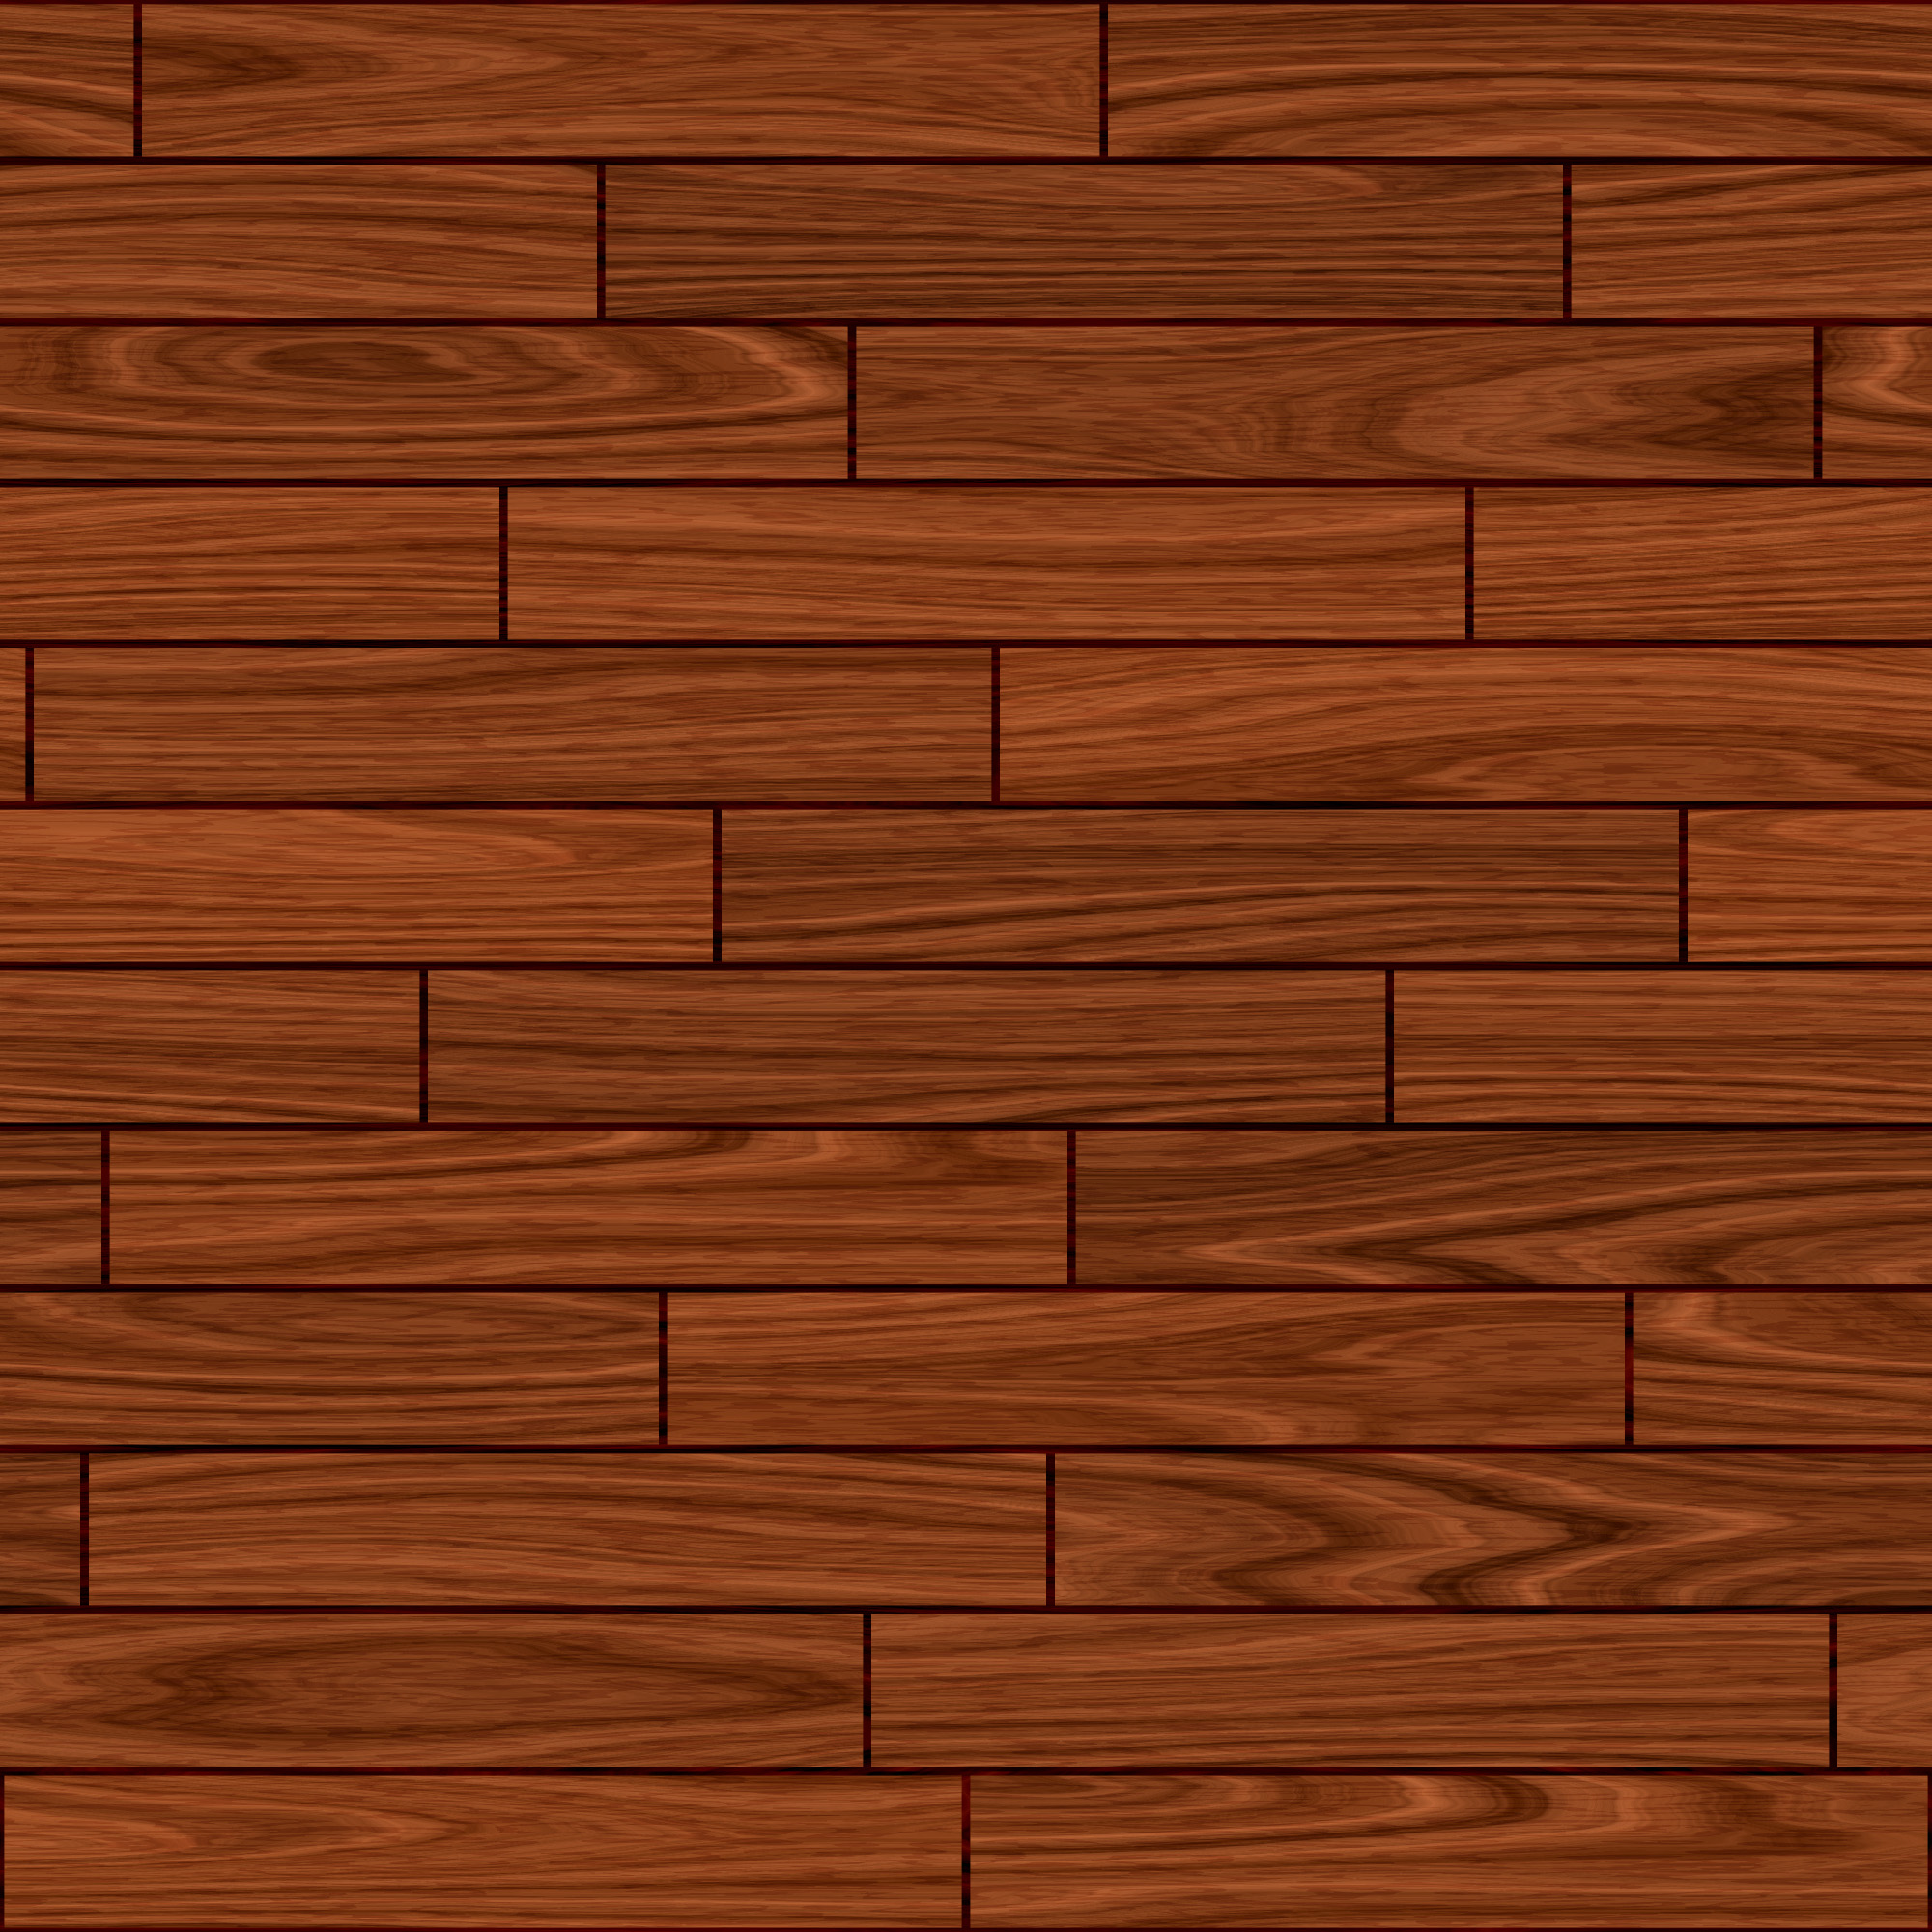 Wood Floor Texture Seamless Rich Wood Patterns Free Textures 